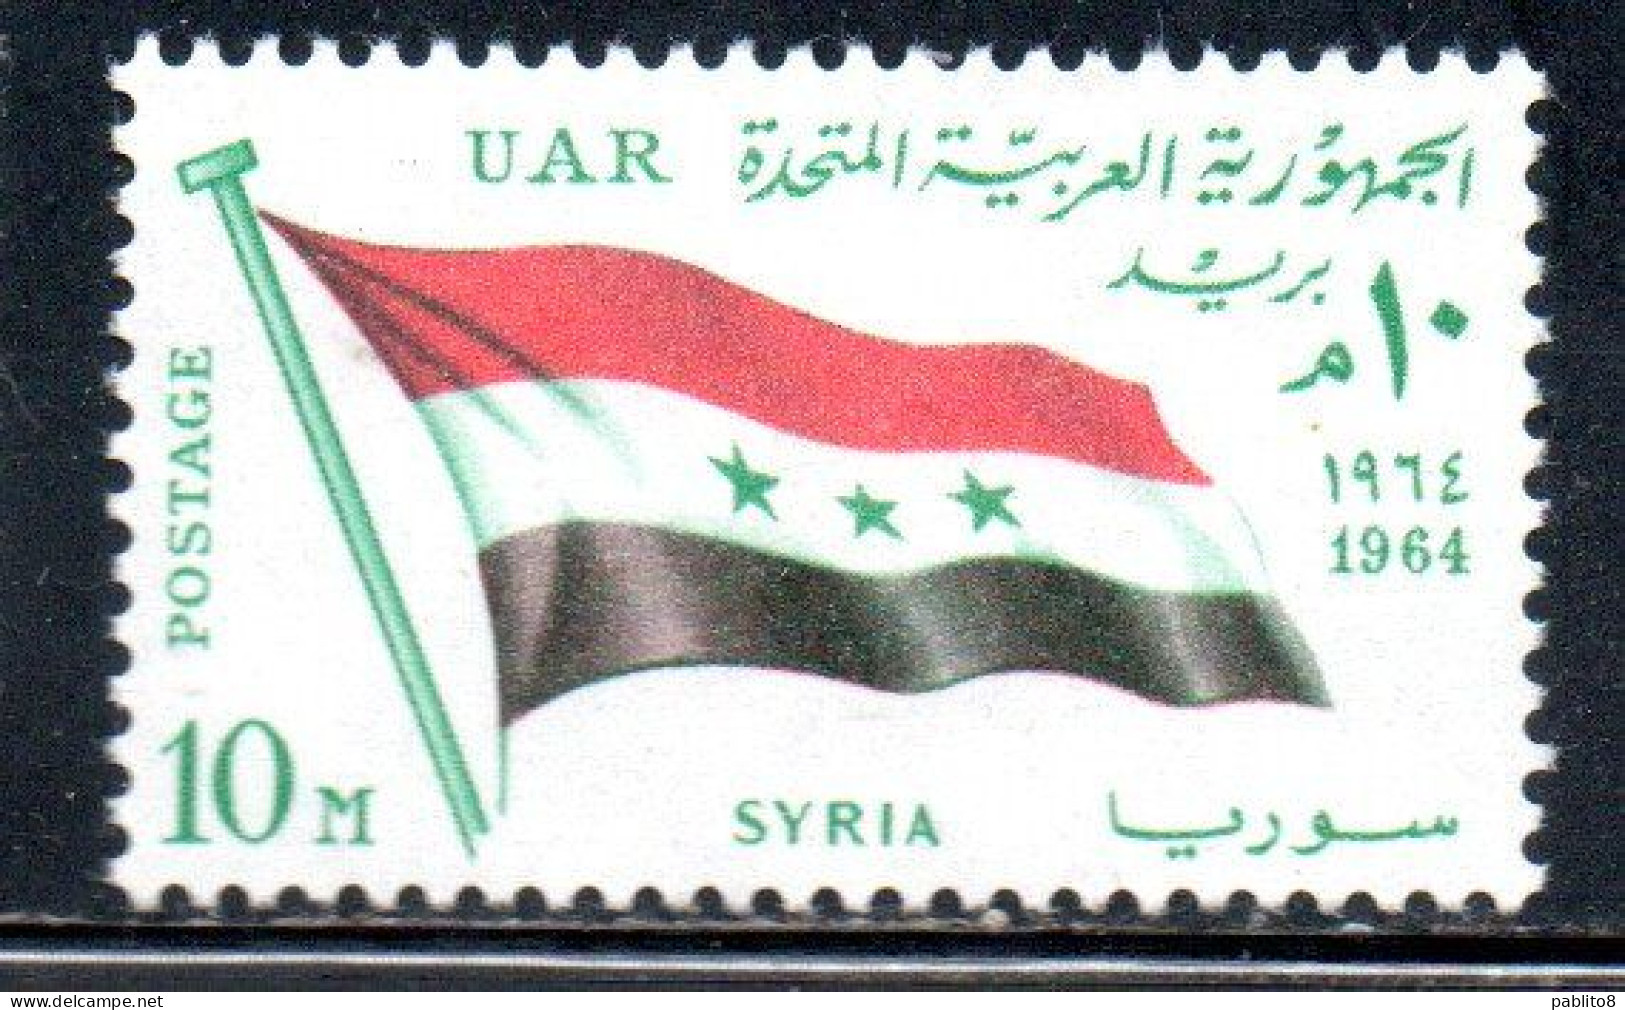 UAR EGYPT EGITTO 1964 SECOND MEETING OF HEADS STATE ARAB LEAGUE FLAG OF SYRIA 10m MH - Unused Stamps